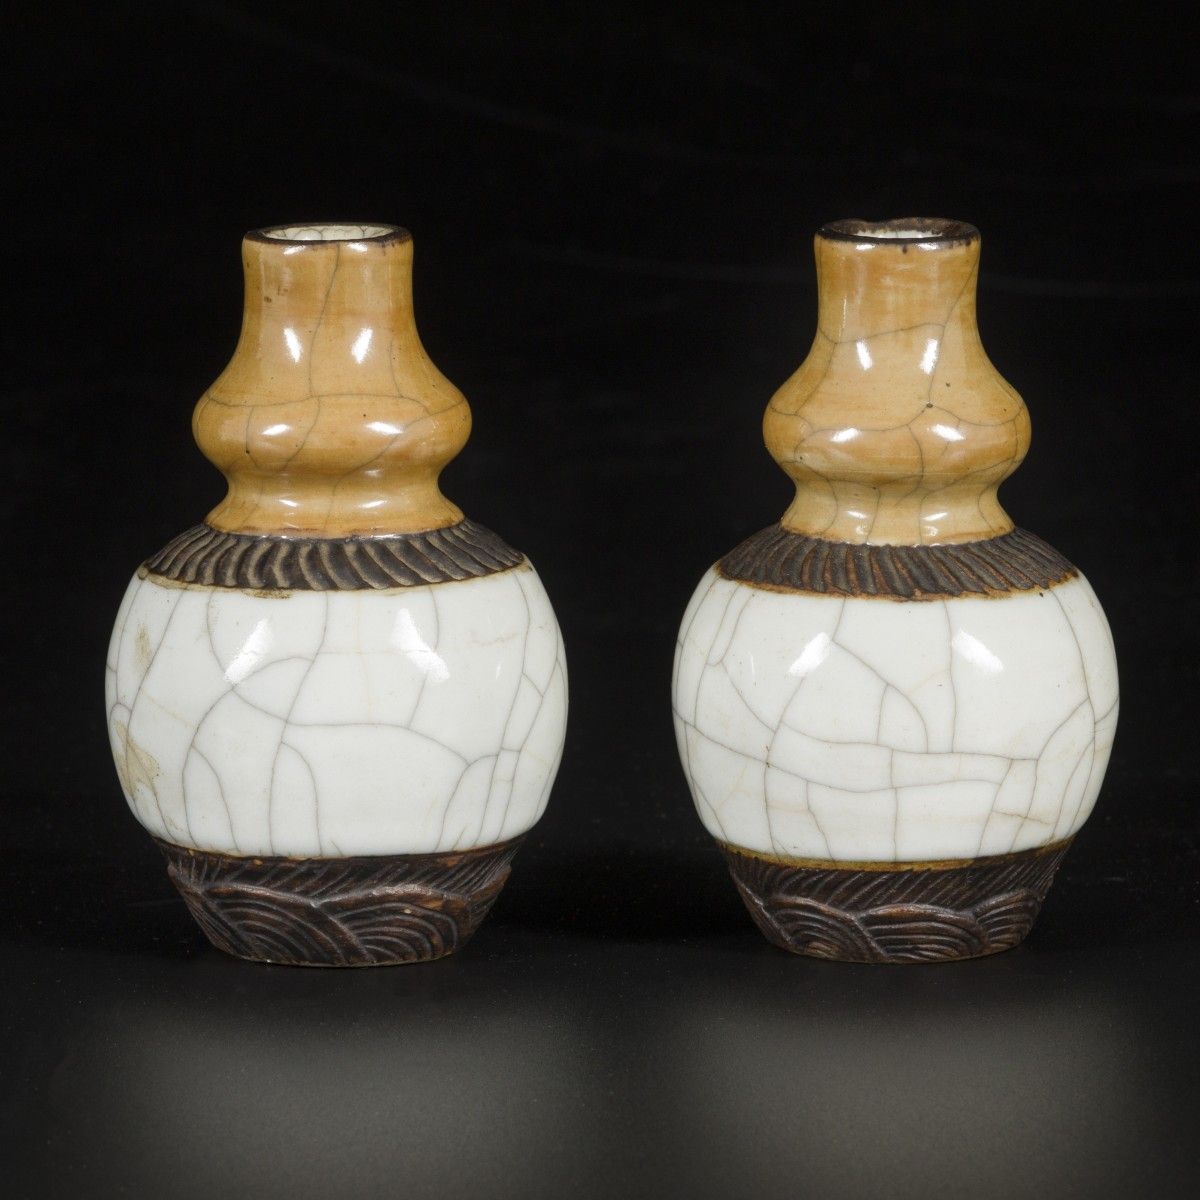 A set of (2) vases in Nanking earthenware, China, 19th century. Abm. 13 x 8 cm. &hellip;